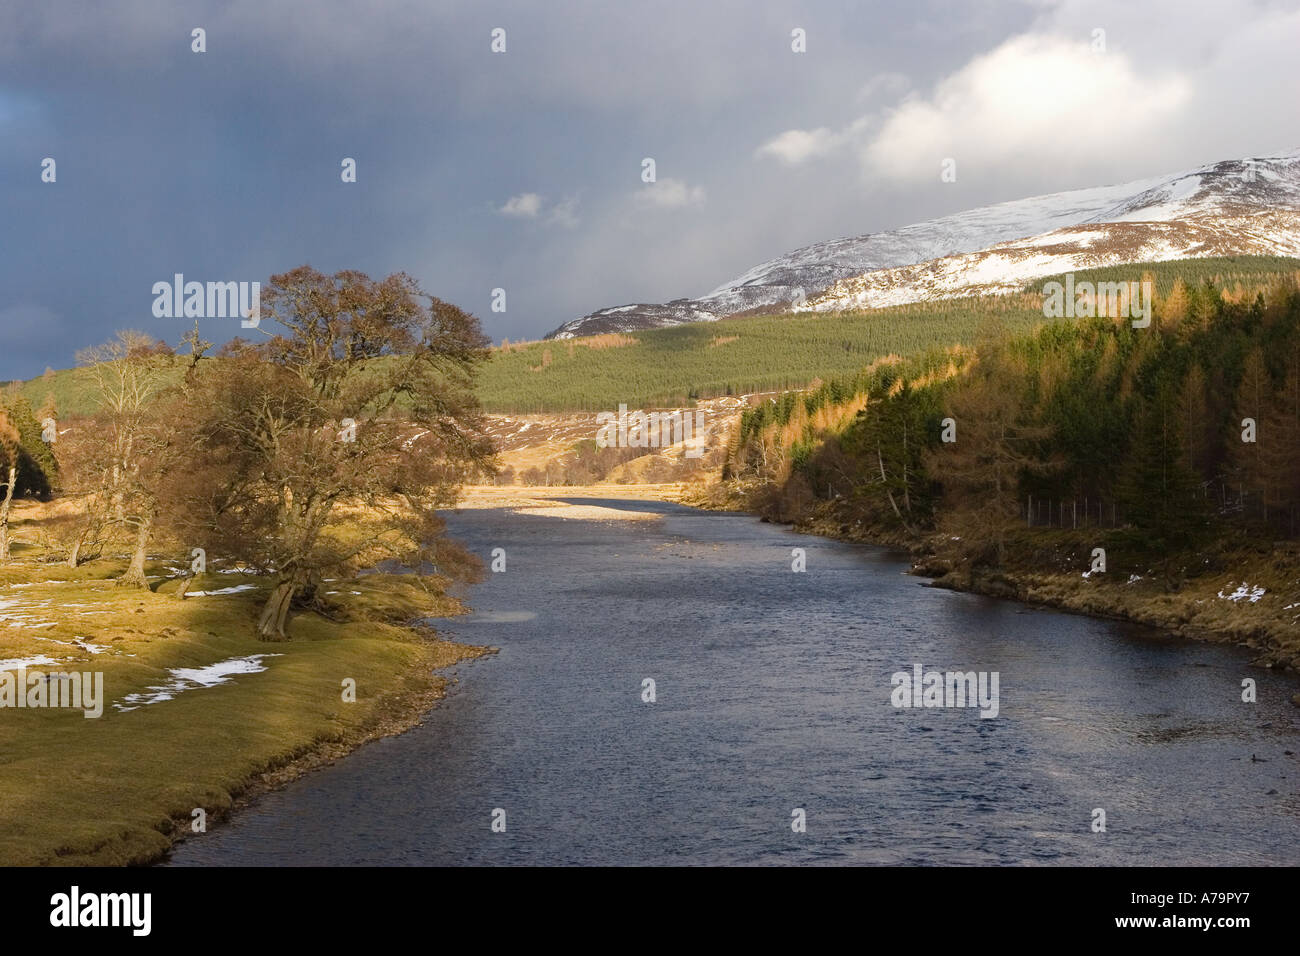 Winter View towards Morrone Hill along the river Dee as seen from Victoria Bridge Mar lodge, Cairngorms National Park, Scotland, Royal Deeside, UK Stock Photo